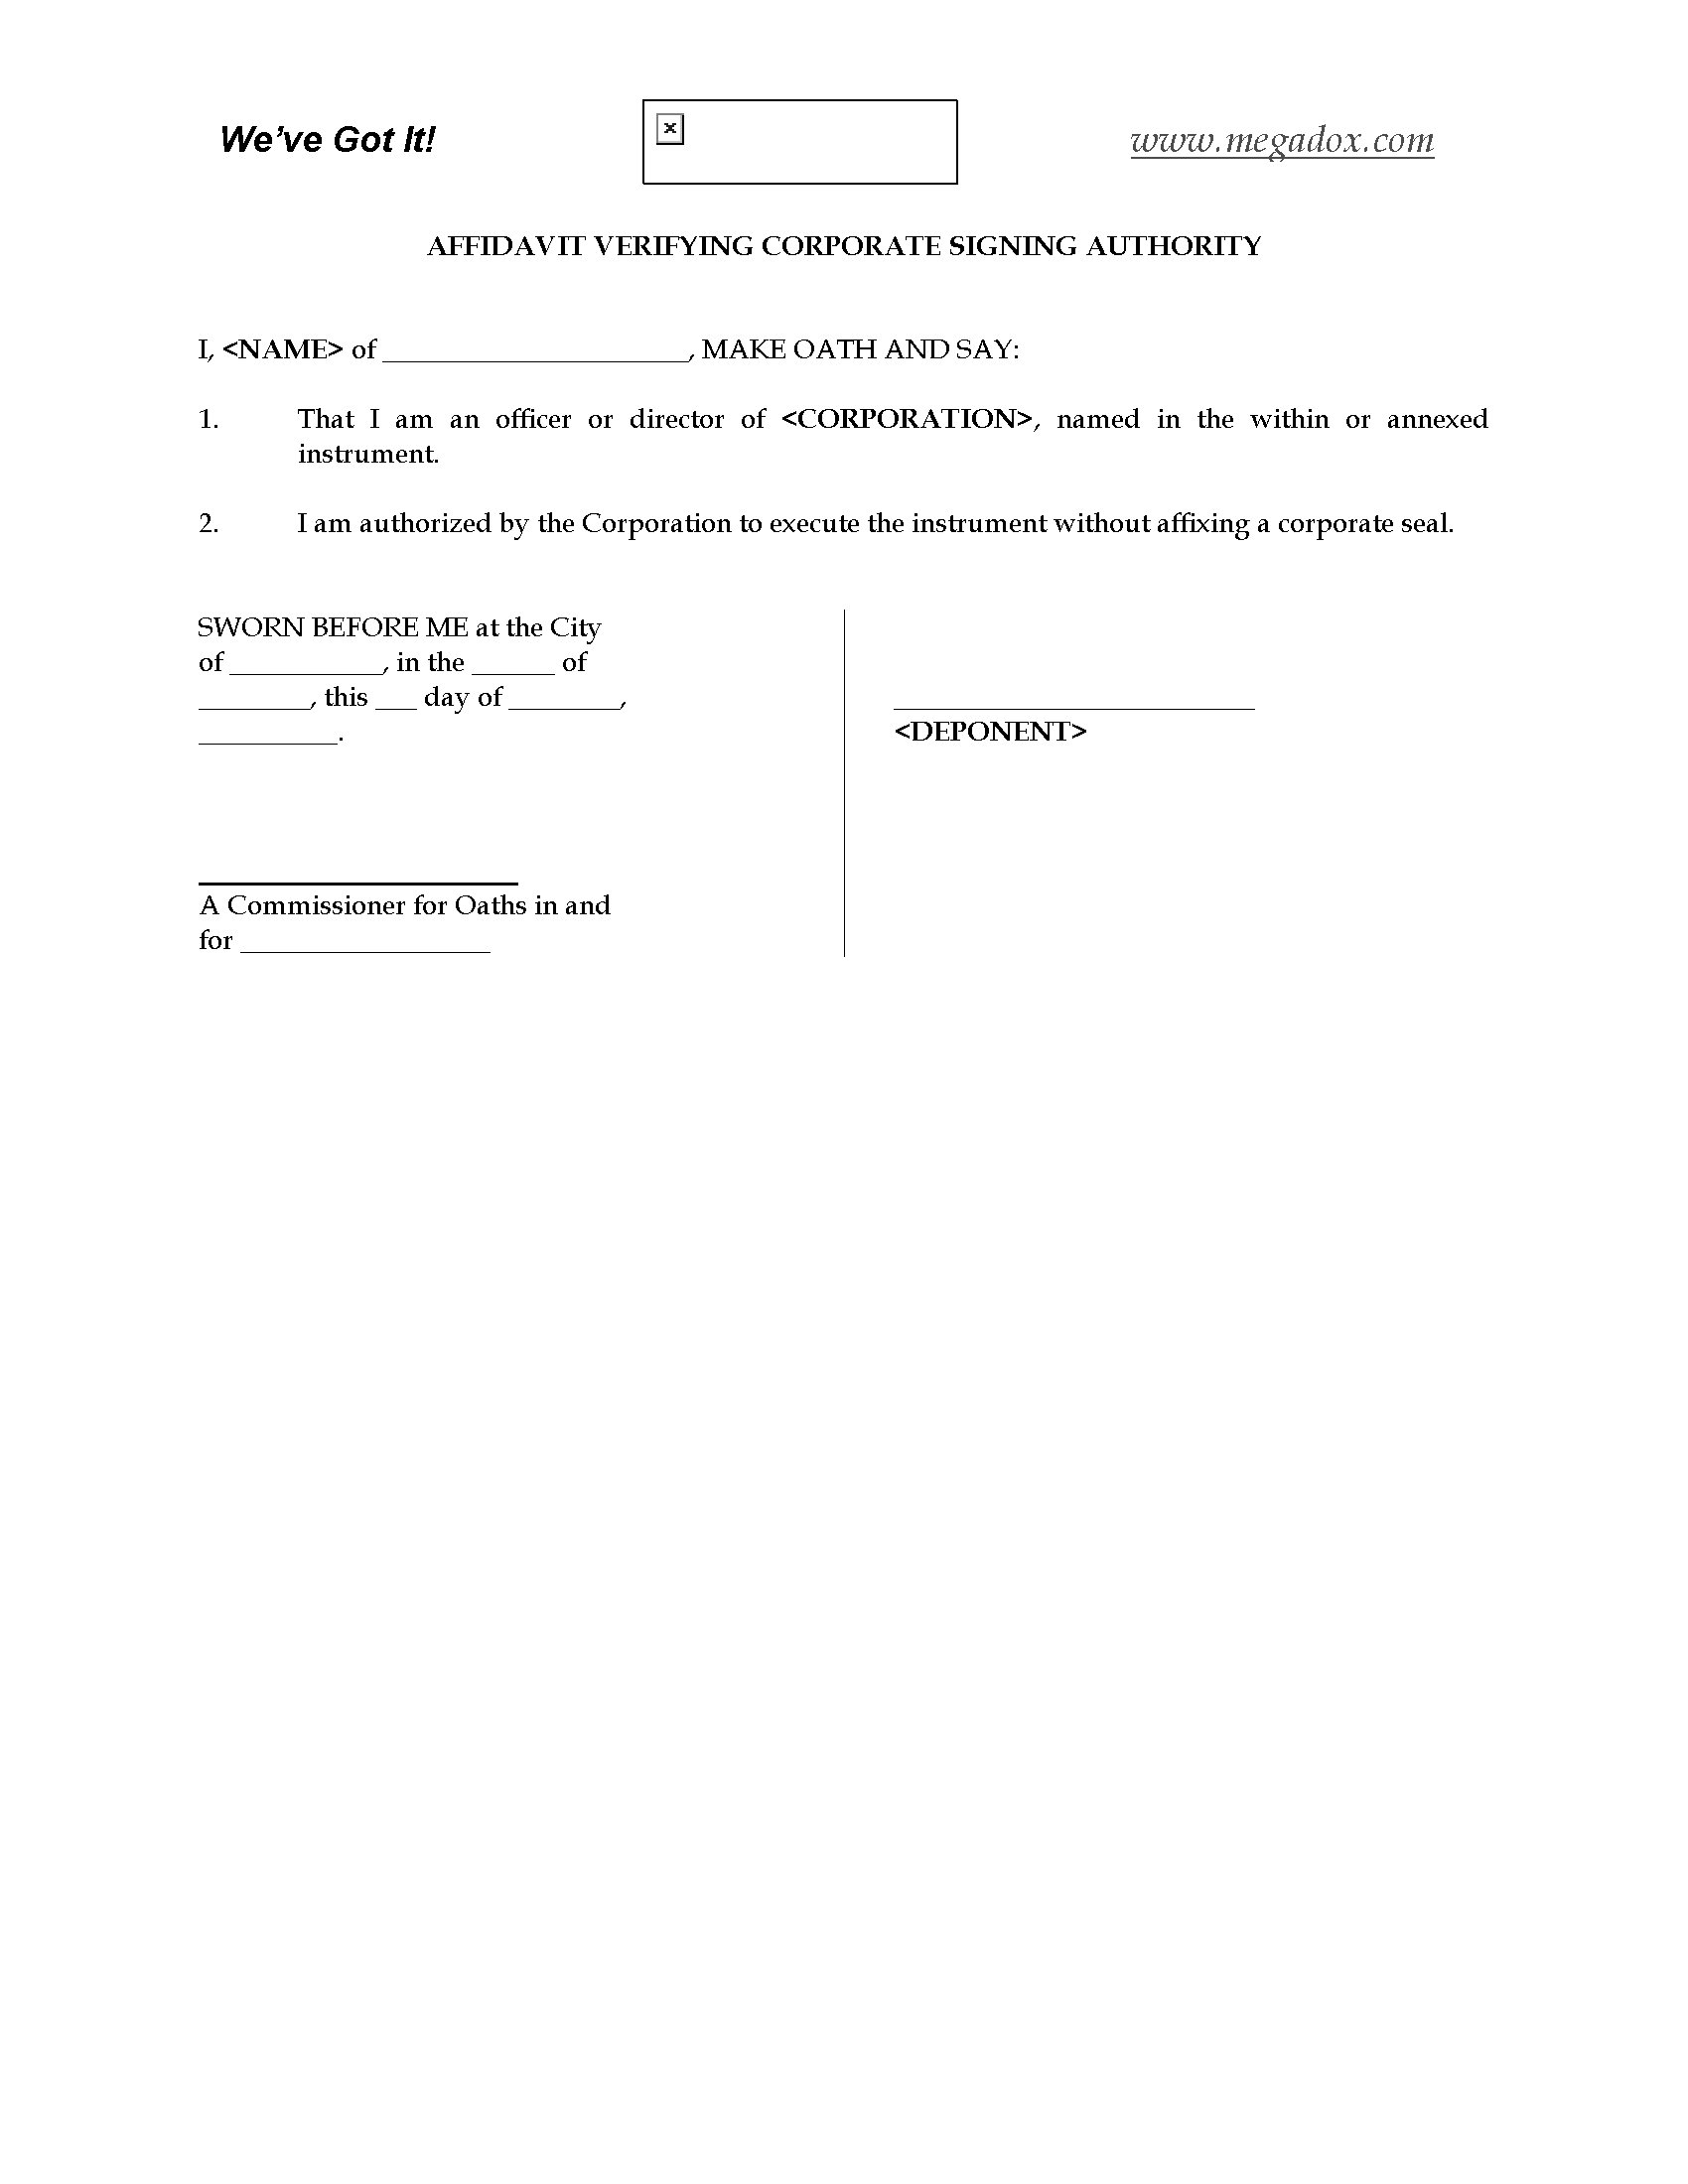 Canada Affidavit of Corporate Signing Authority Legal Forms and